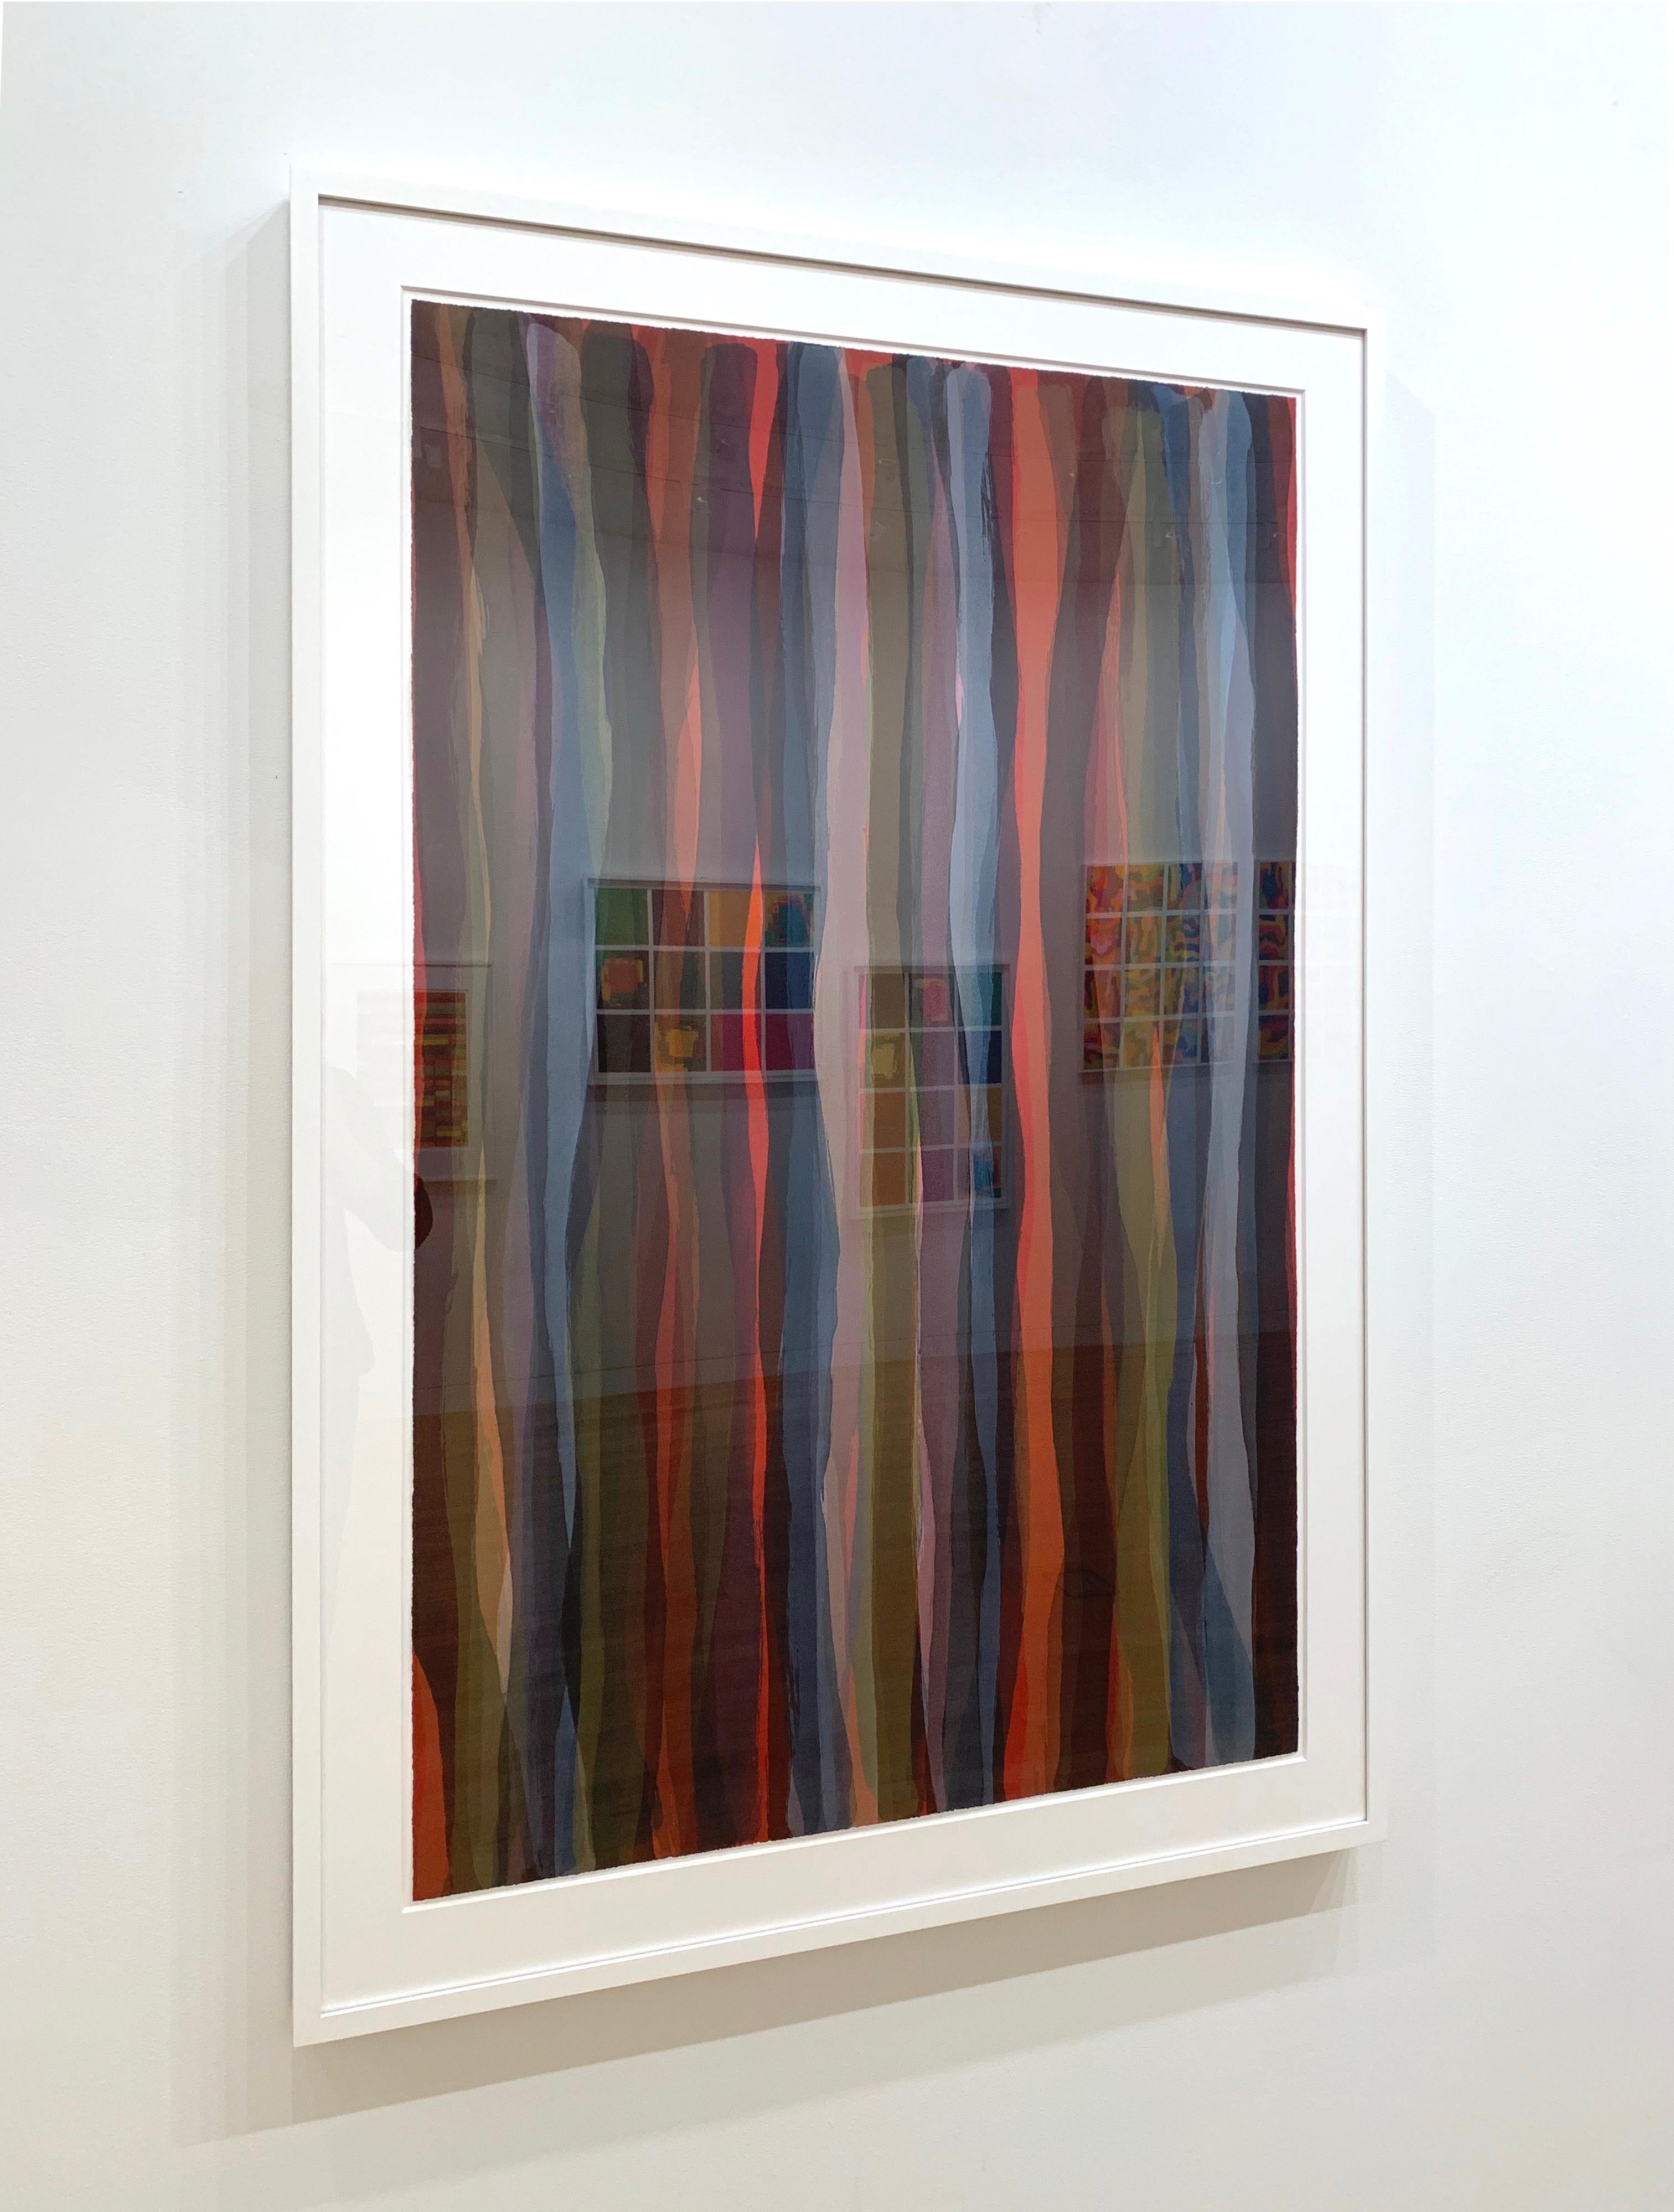 Brushstrokes in Different Colors in Two Directions: One plate - Print by Sol LeWitt